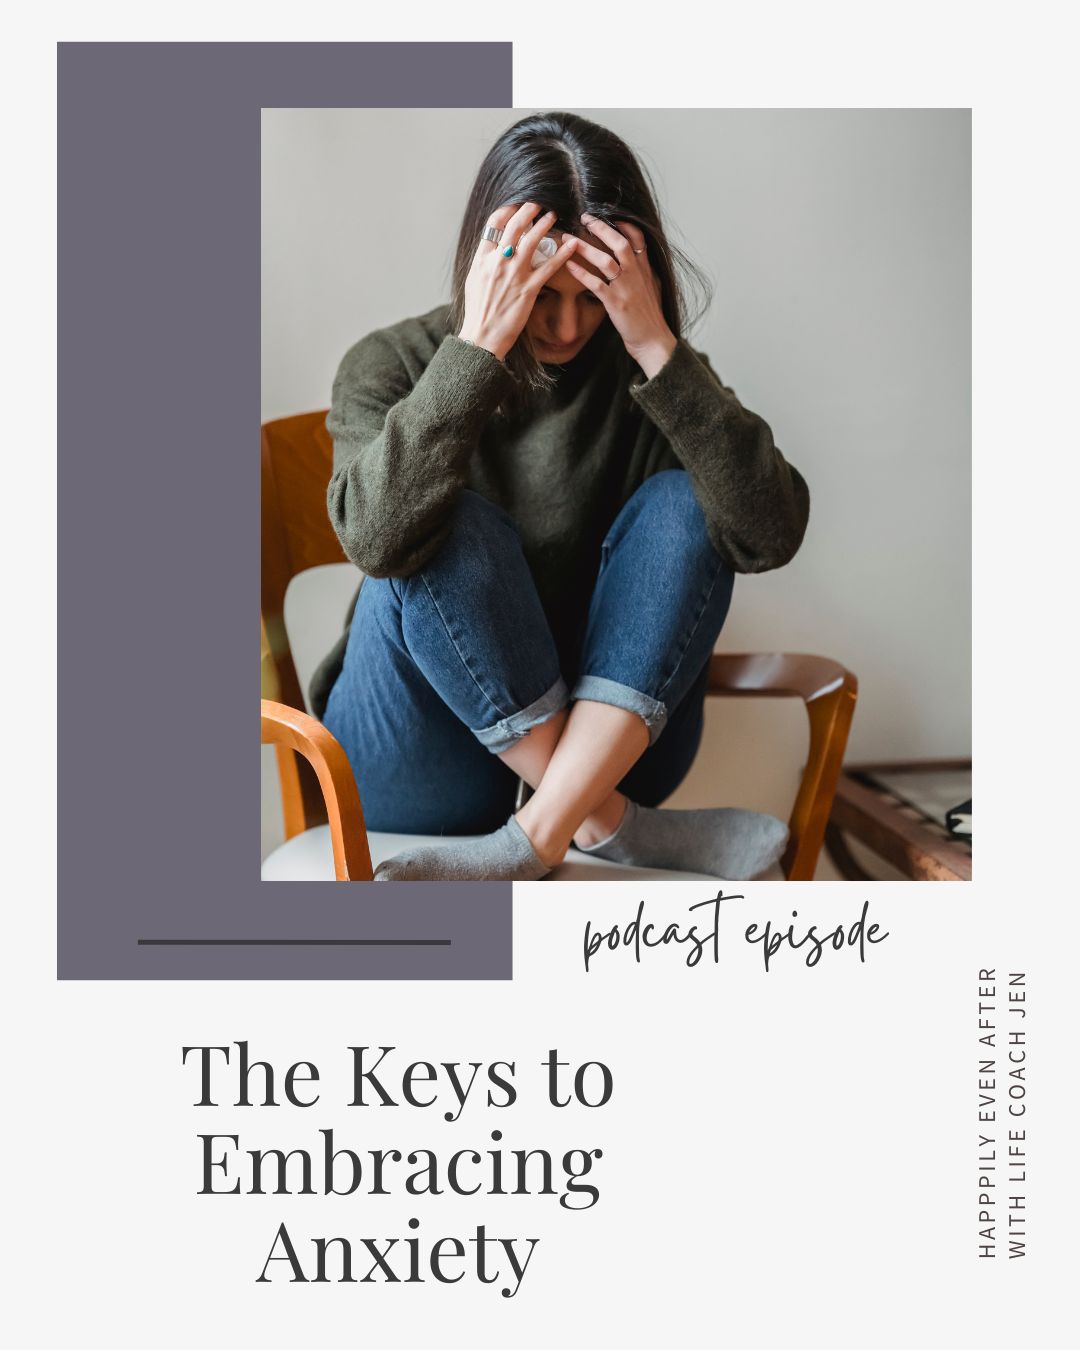 Woman sitting on a chair, covering her face with her hands, with text about a podcast episode titled "the keys to embracing anxiety.